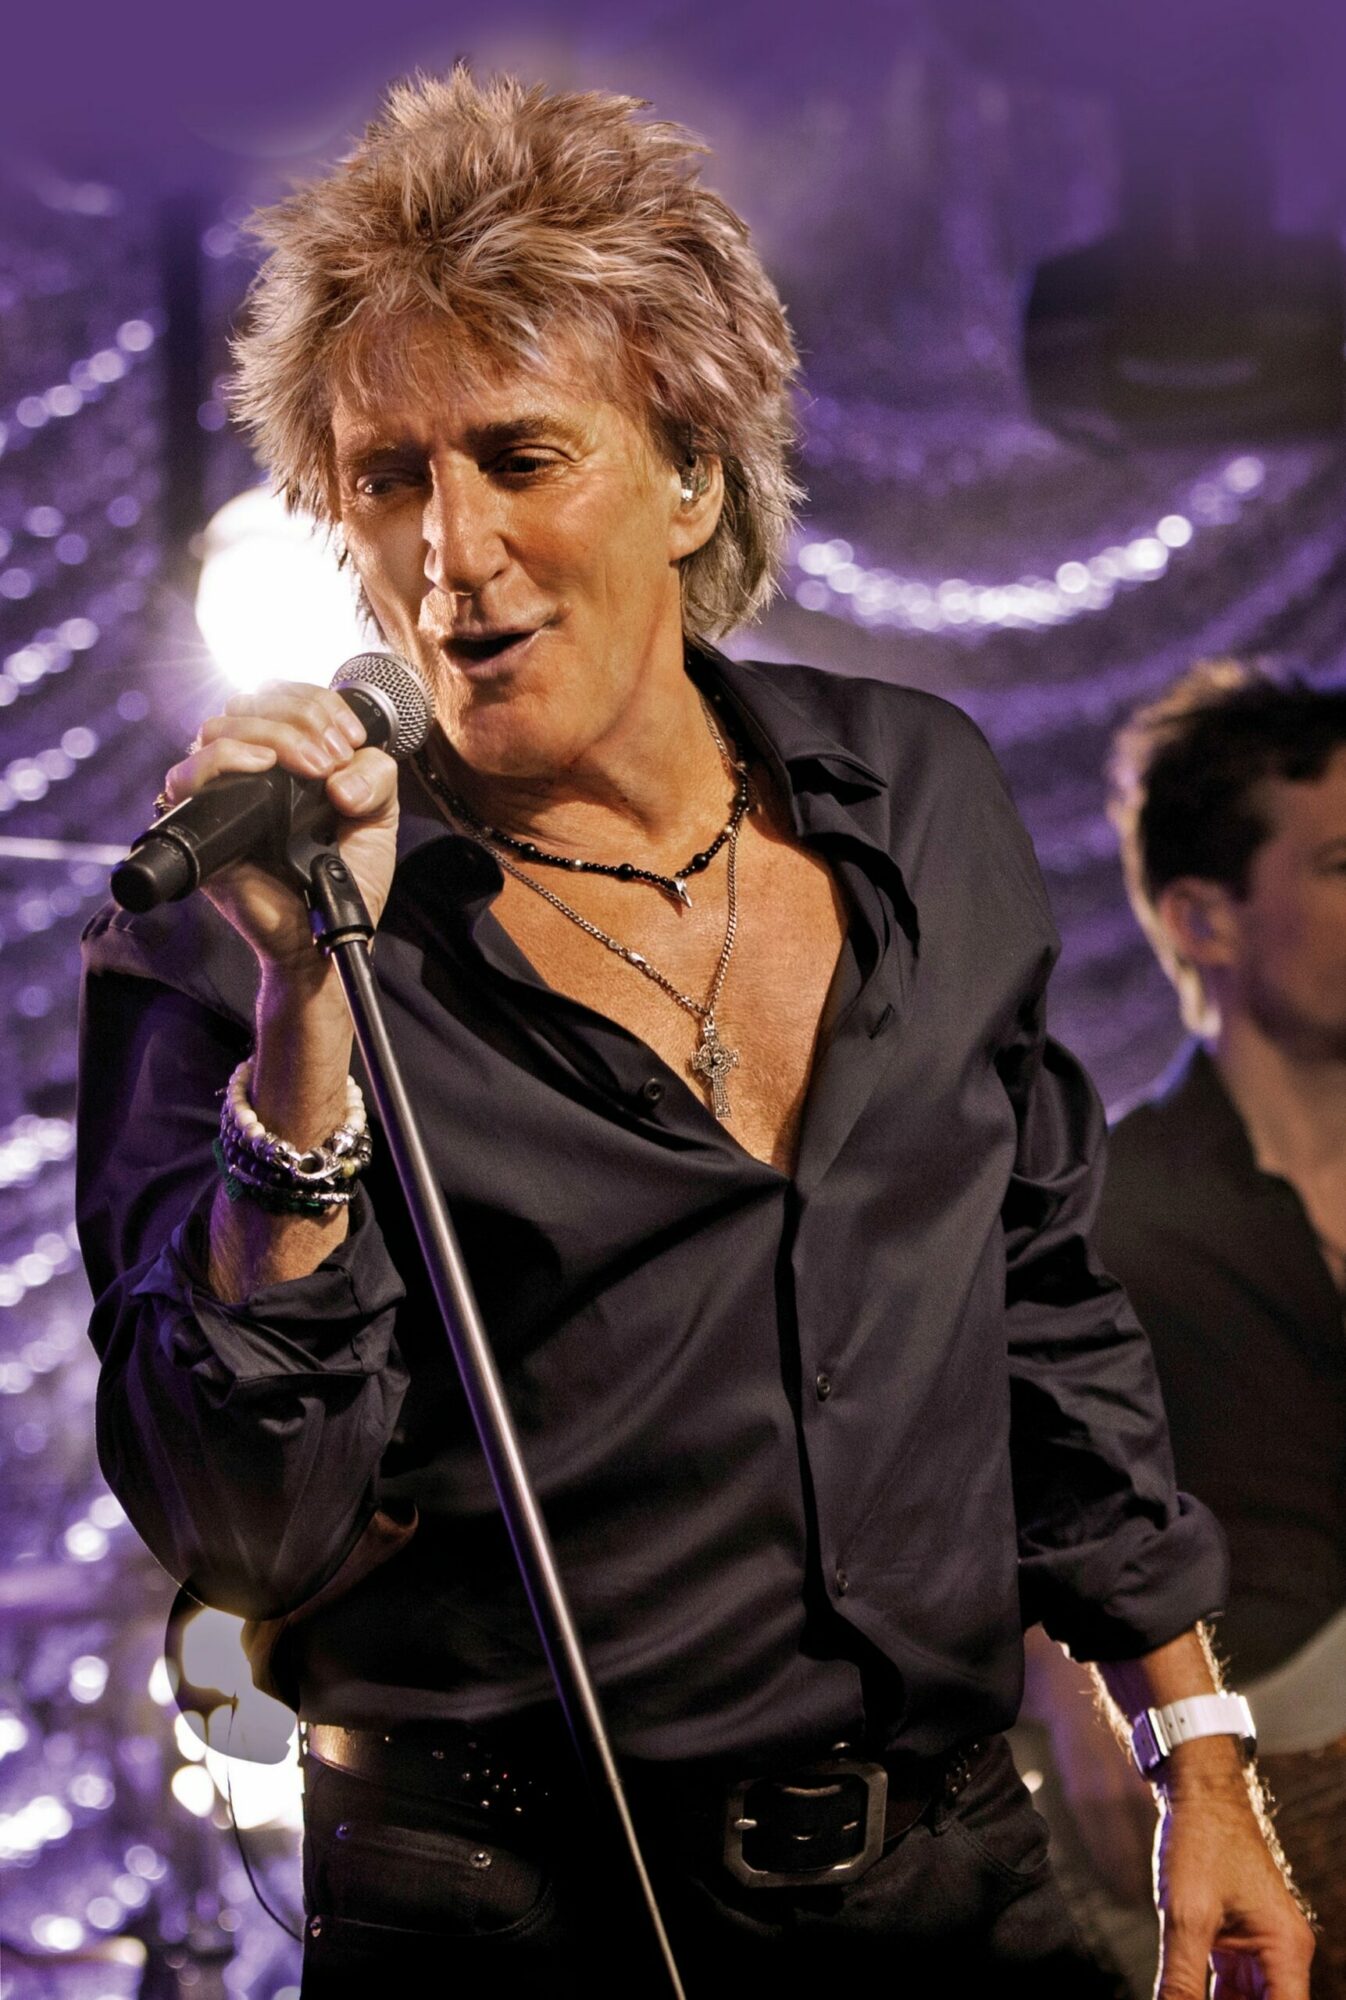 Image name Rod Stewart at Sewell Group Craven Park Stadium Hull scaled the 1 image from the post Rod Stewart with Special Guests Boy George & Culture Club at Sewell Group Craven Park Stadium, Hull in Yorkshire.com.